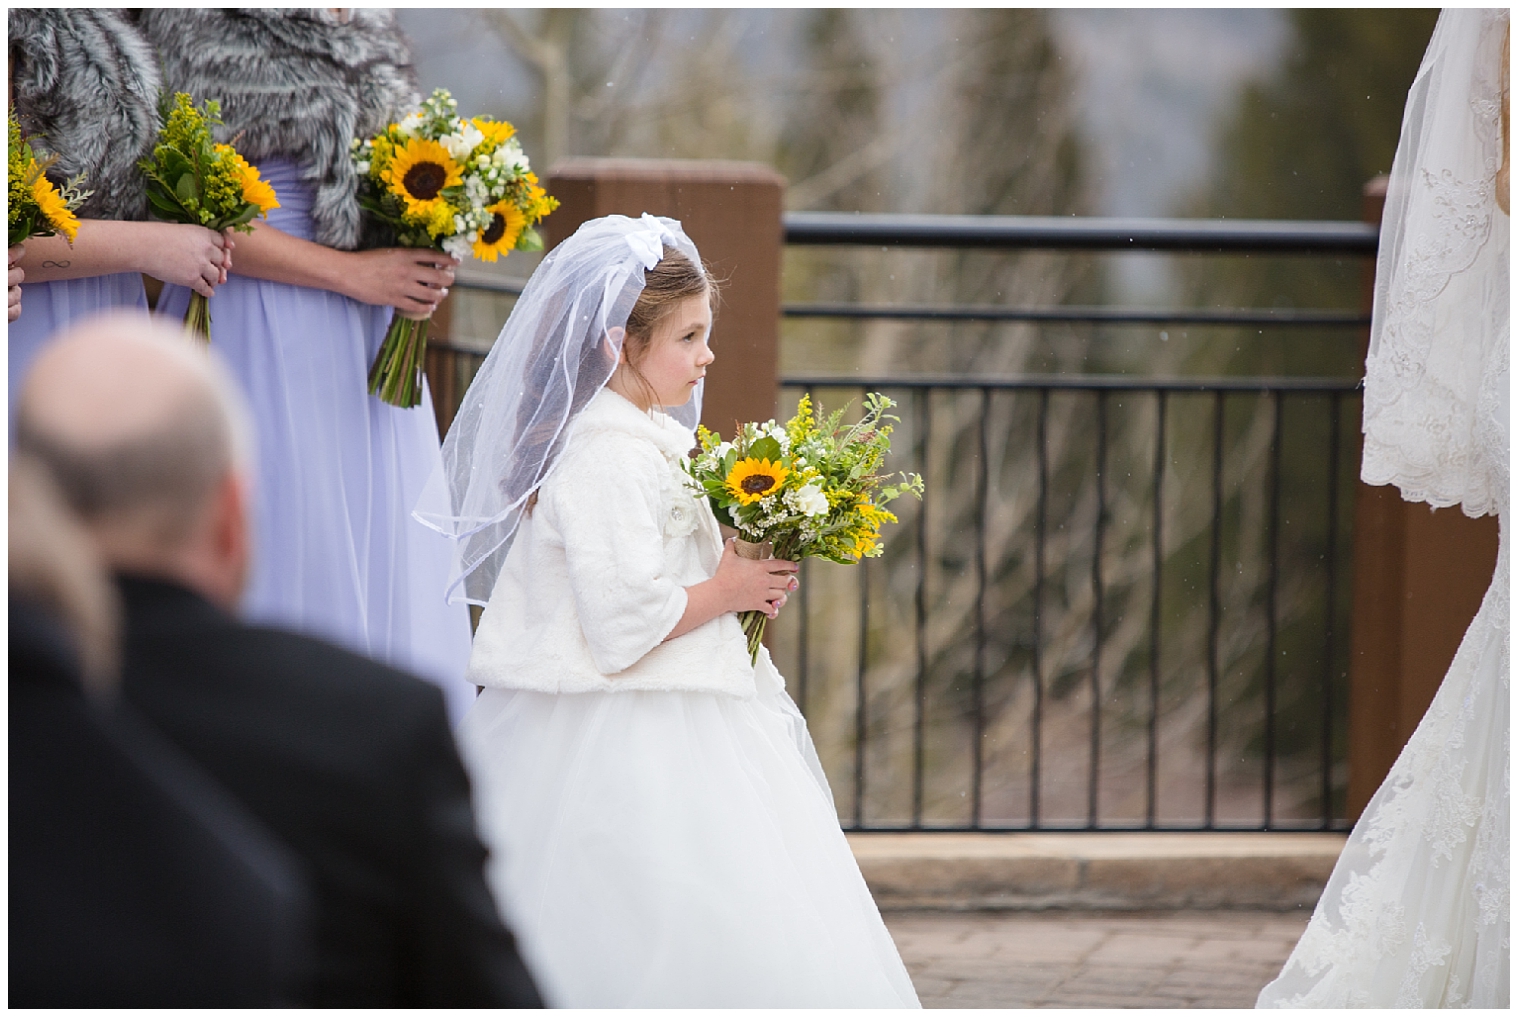 Flower girl stands during a wedding ceremony at Sevens in Breckenridge.